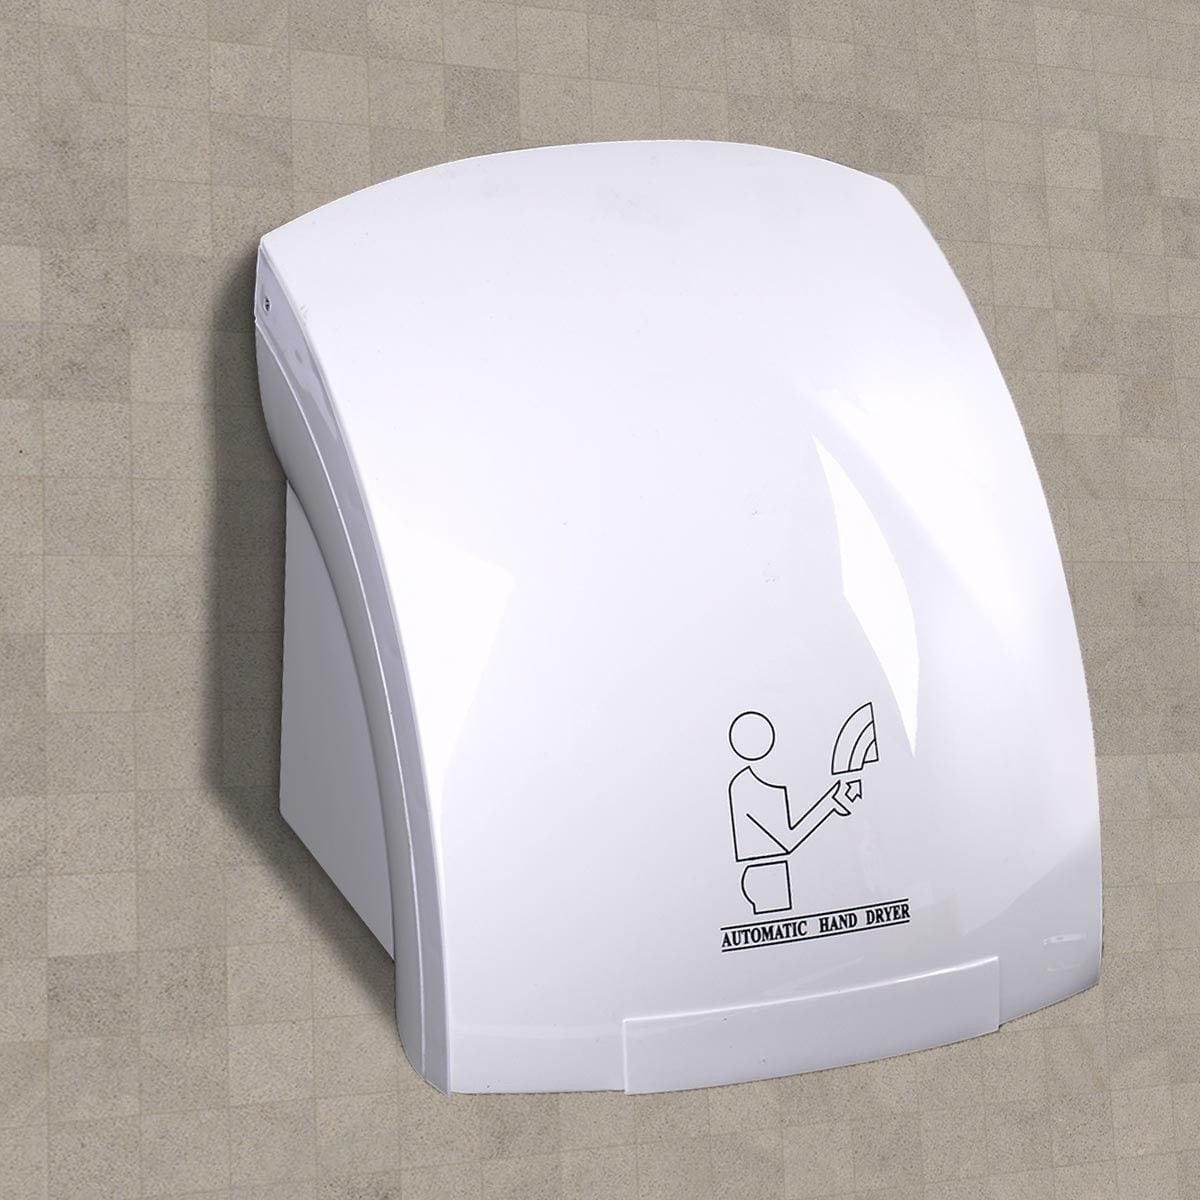 Wall Mounted Plastic Automatic Hand Dryer | Supply Master | Accra, Ghana Janitorial & Cleaning Buy Tools hardware Building materials